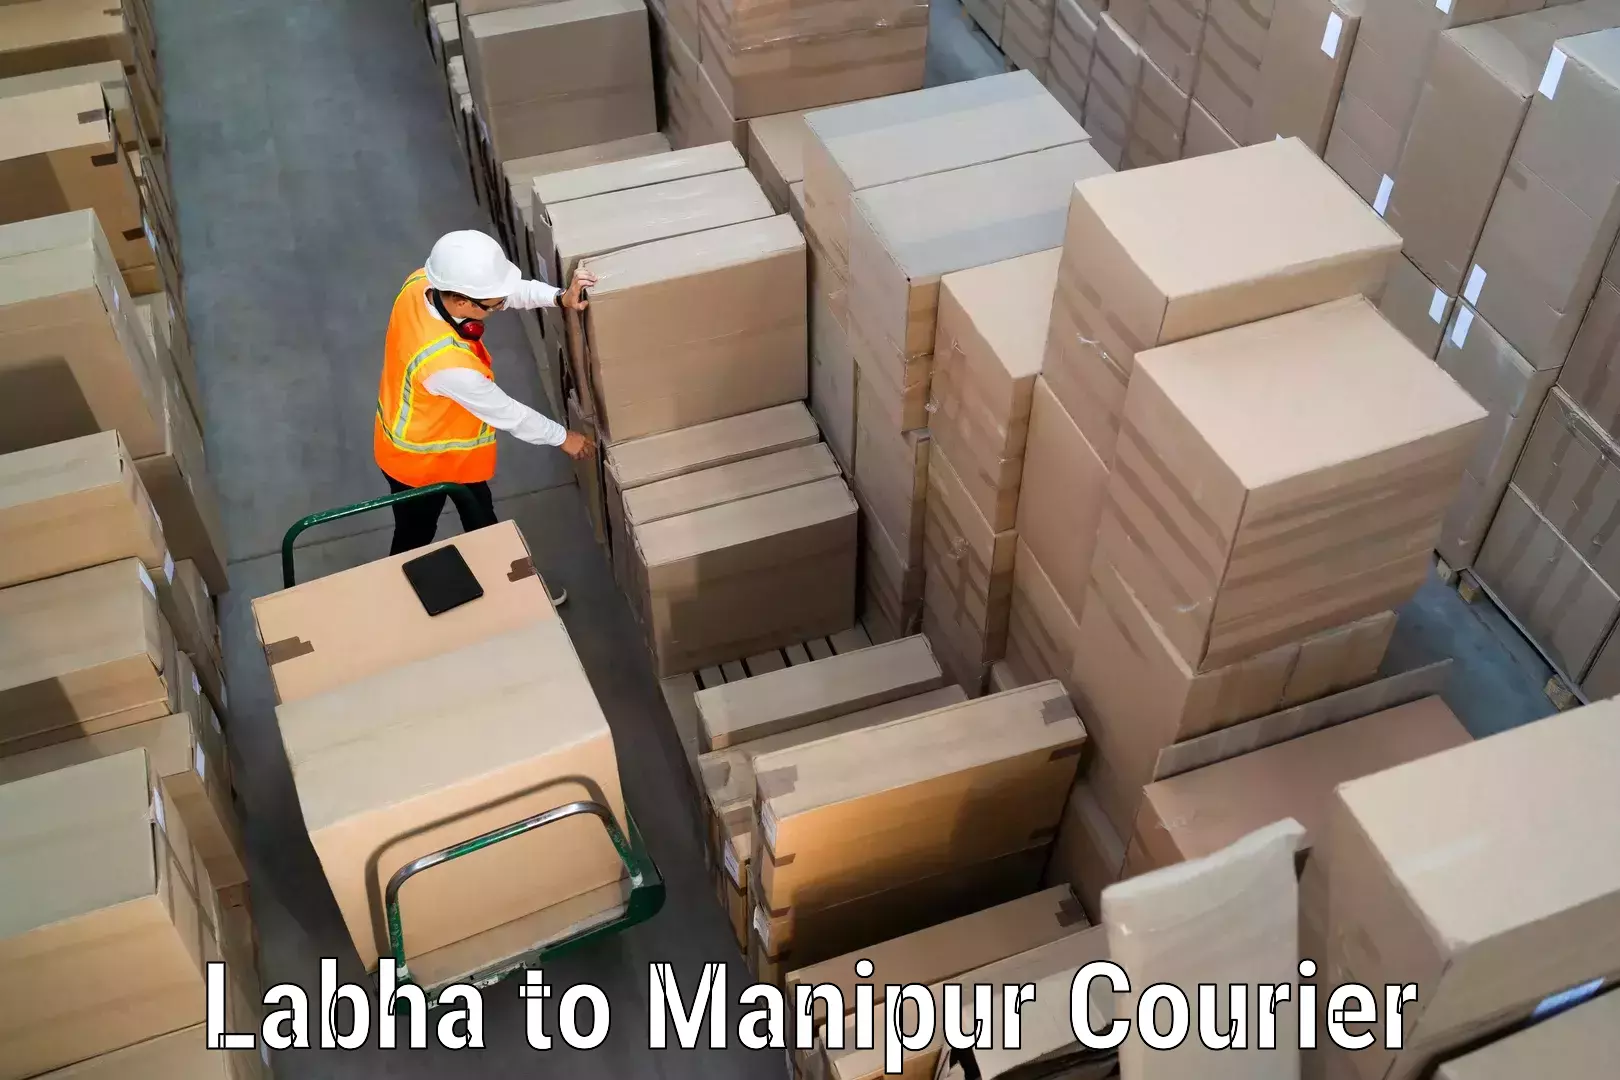 Subscription-based courier Labha to Manipur